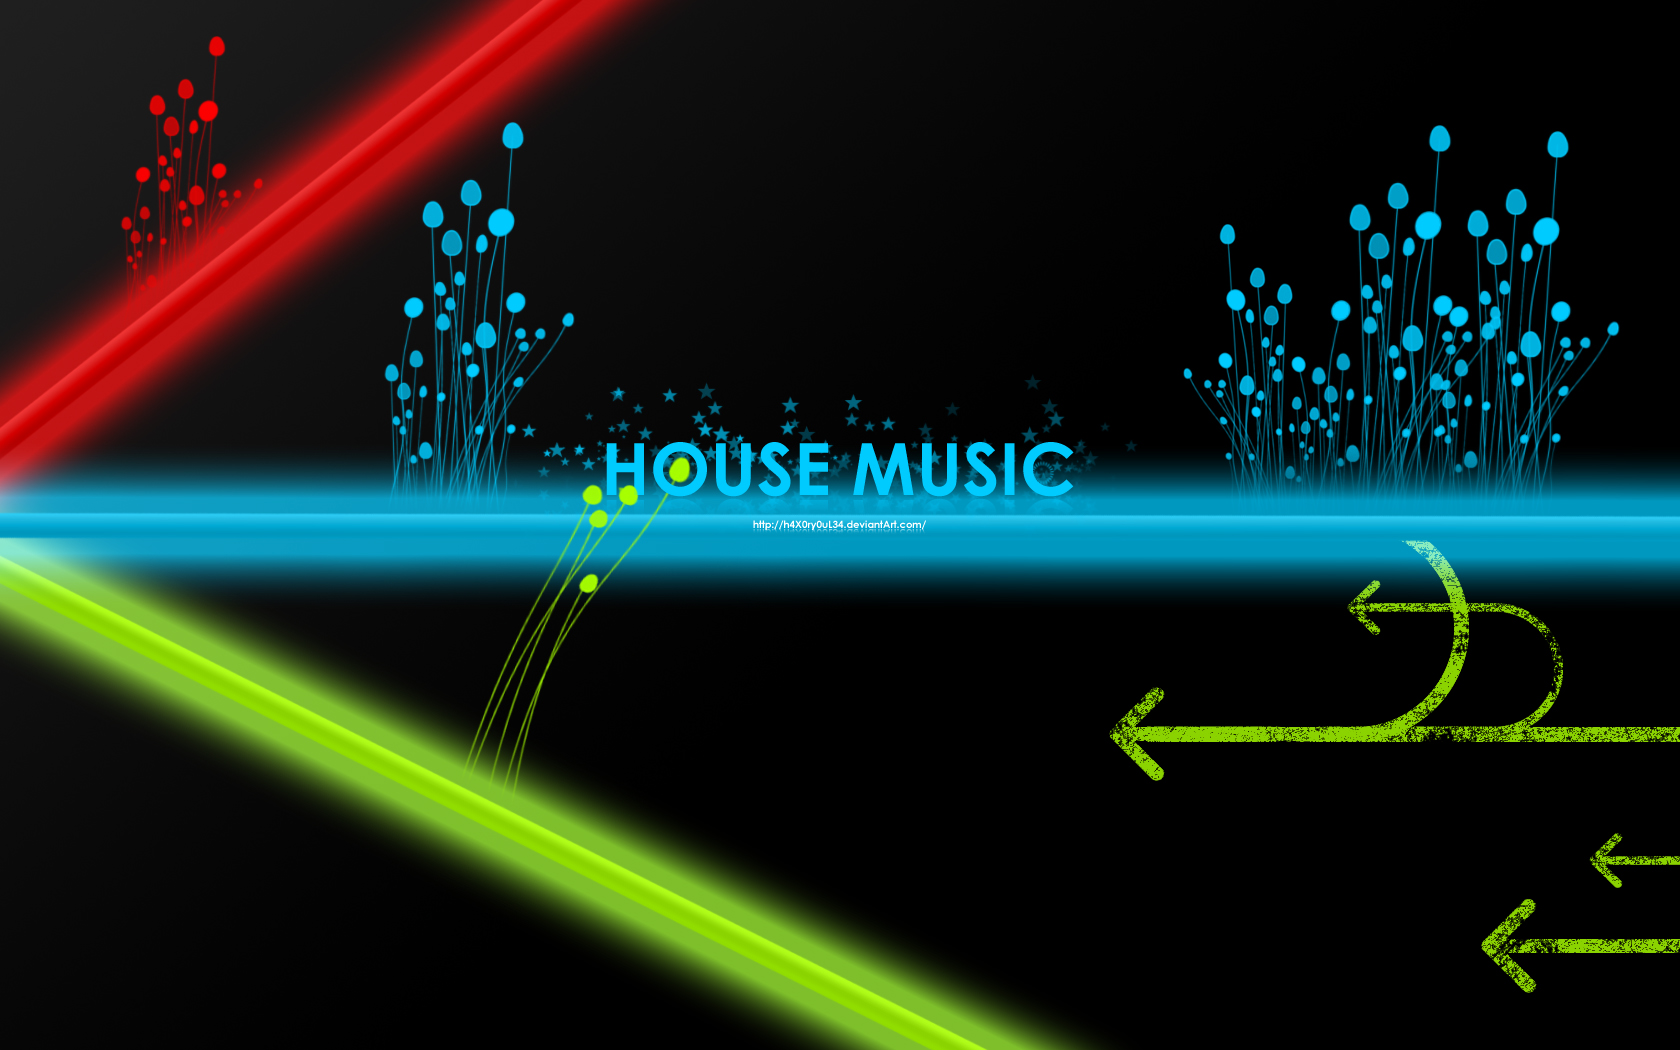 HD wallpaper House Music Wallpaper By Hxryul HD Pictures 2013 by